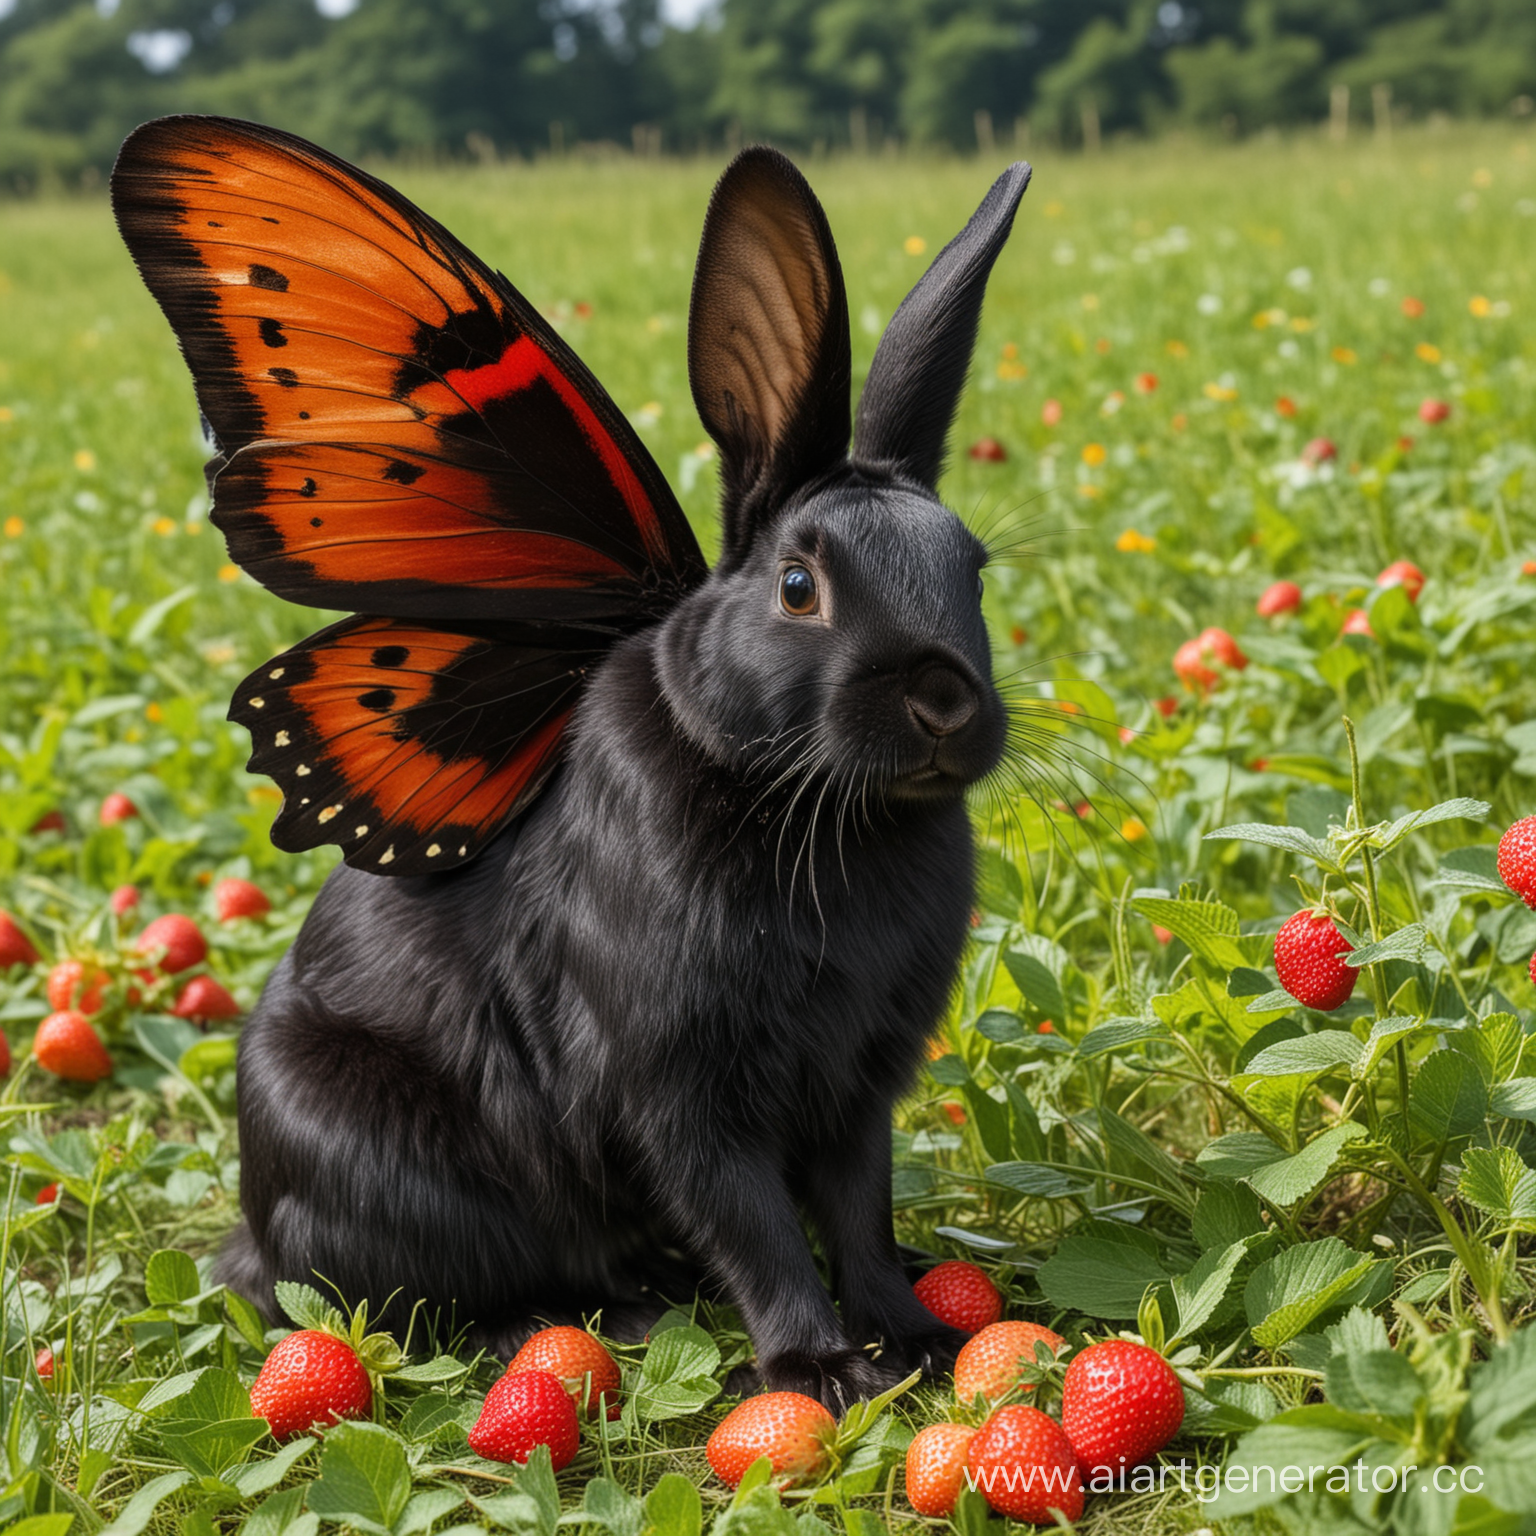 A black rabbit with wings like a Doris Heliconida butterfly. He is sitting in a meadow and chewing strawberries